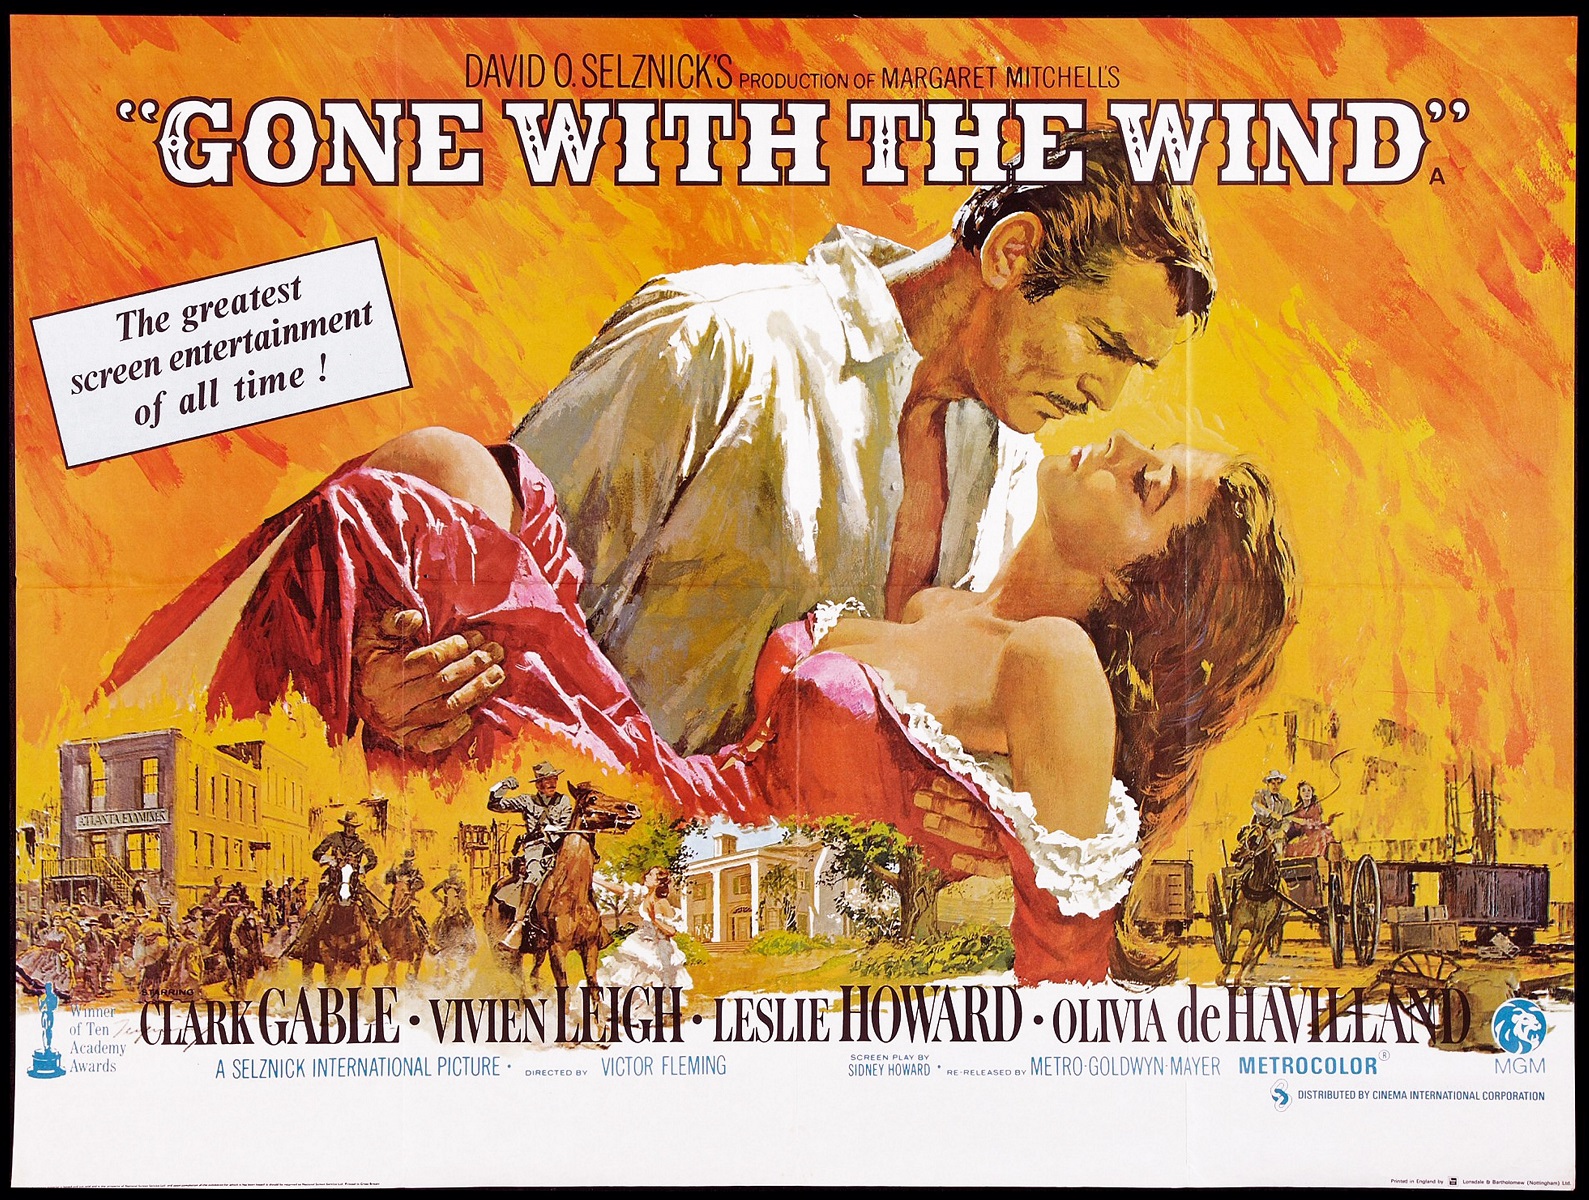 Poster for the 1939 production of 'Gone with the Wind' staring Vvien Leigh and Cark Gable